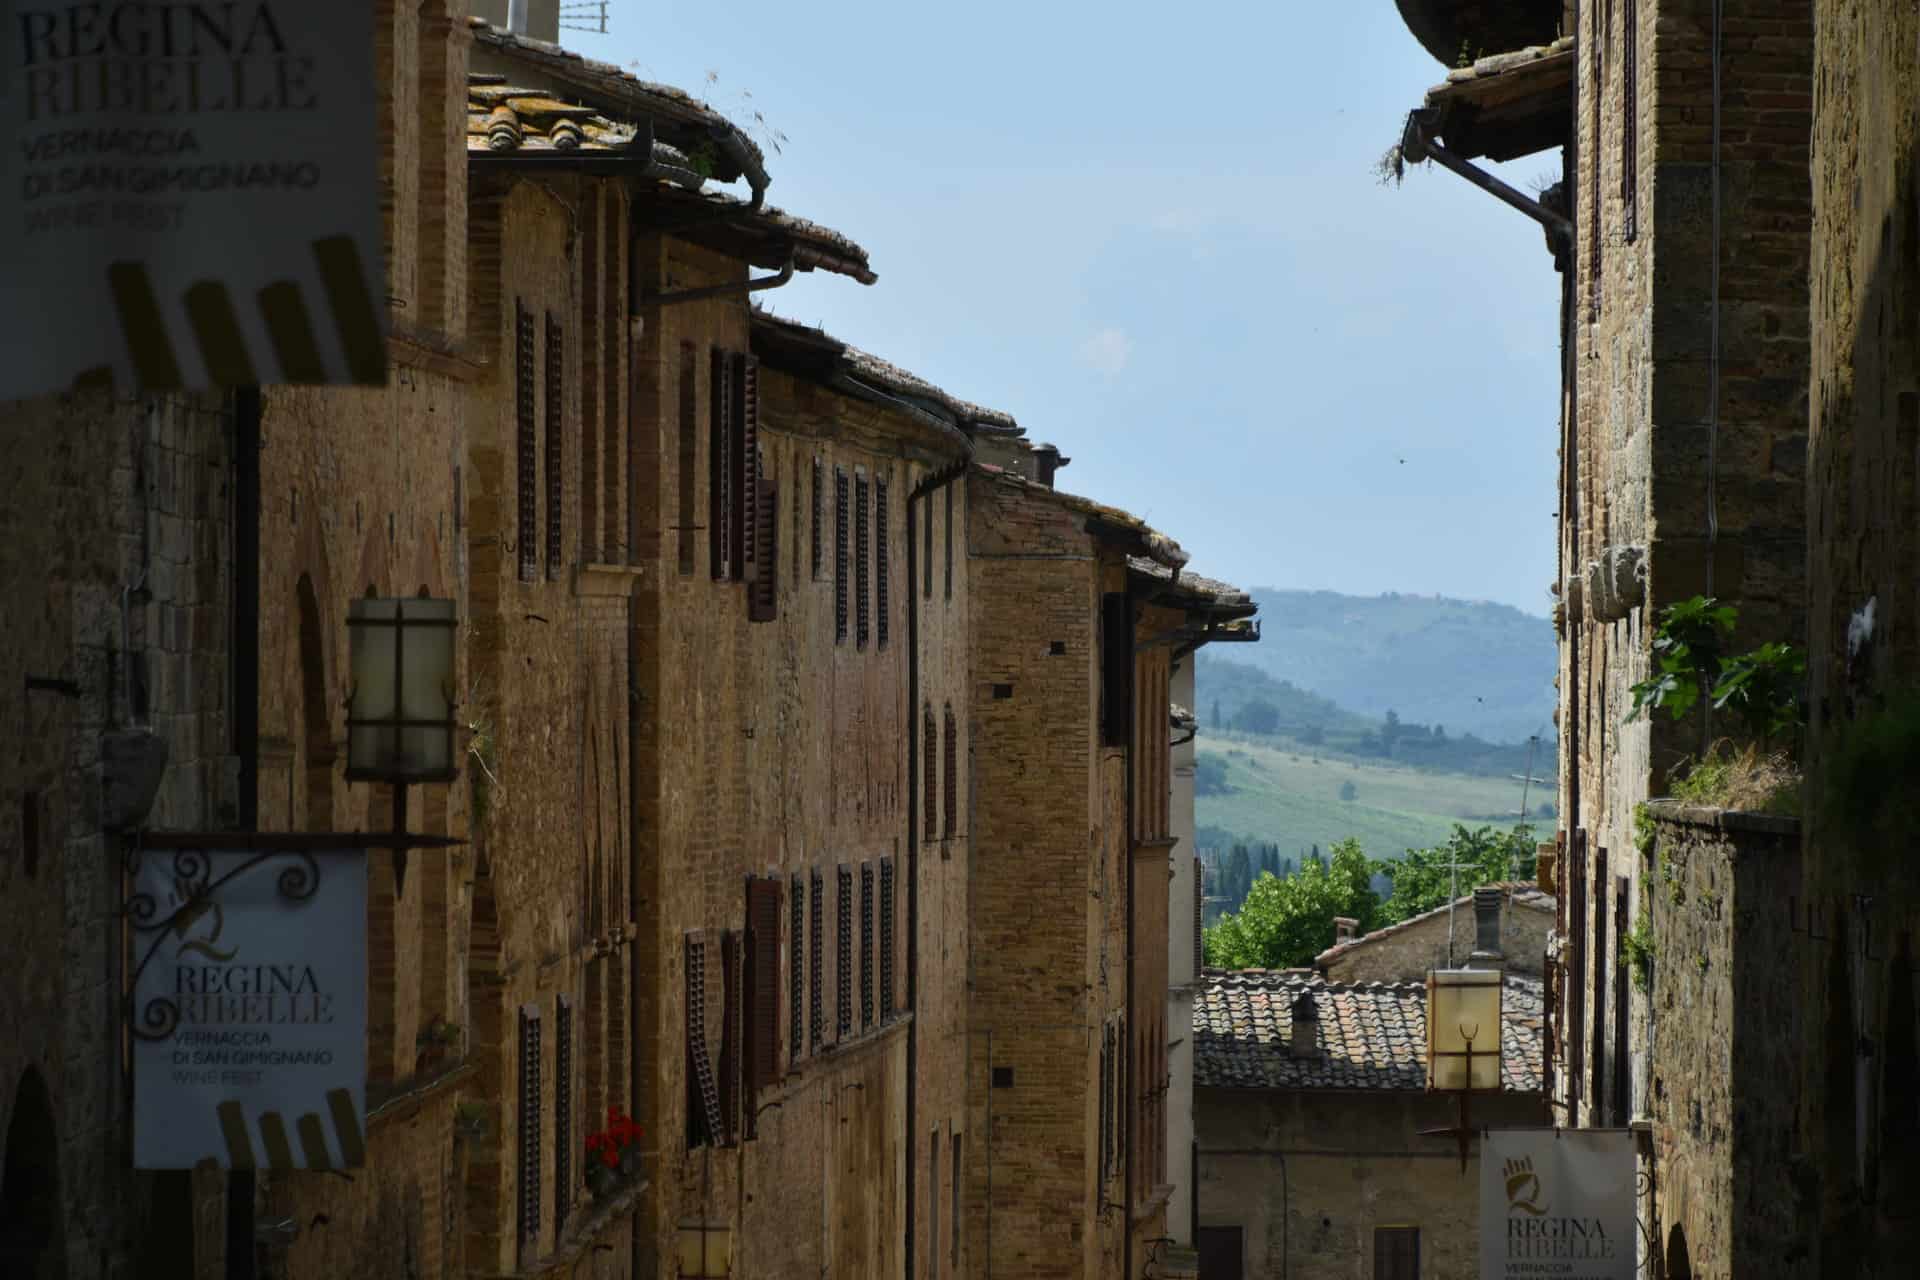 a street in San Gimignano, a town in Tuscany, Italy